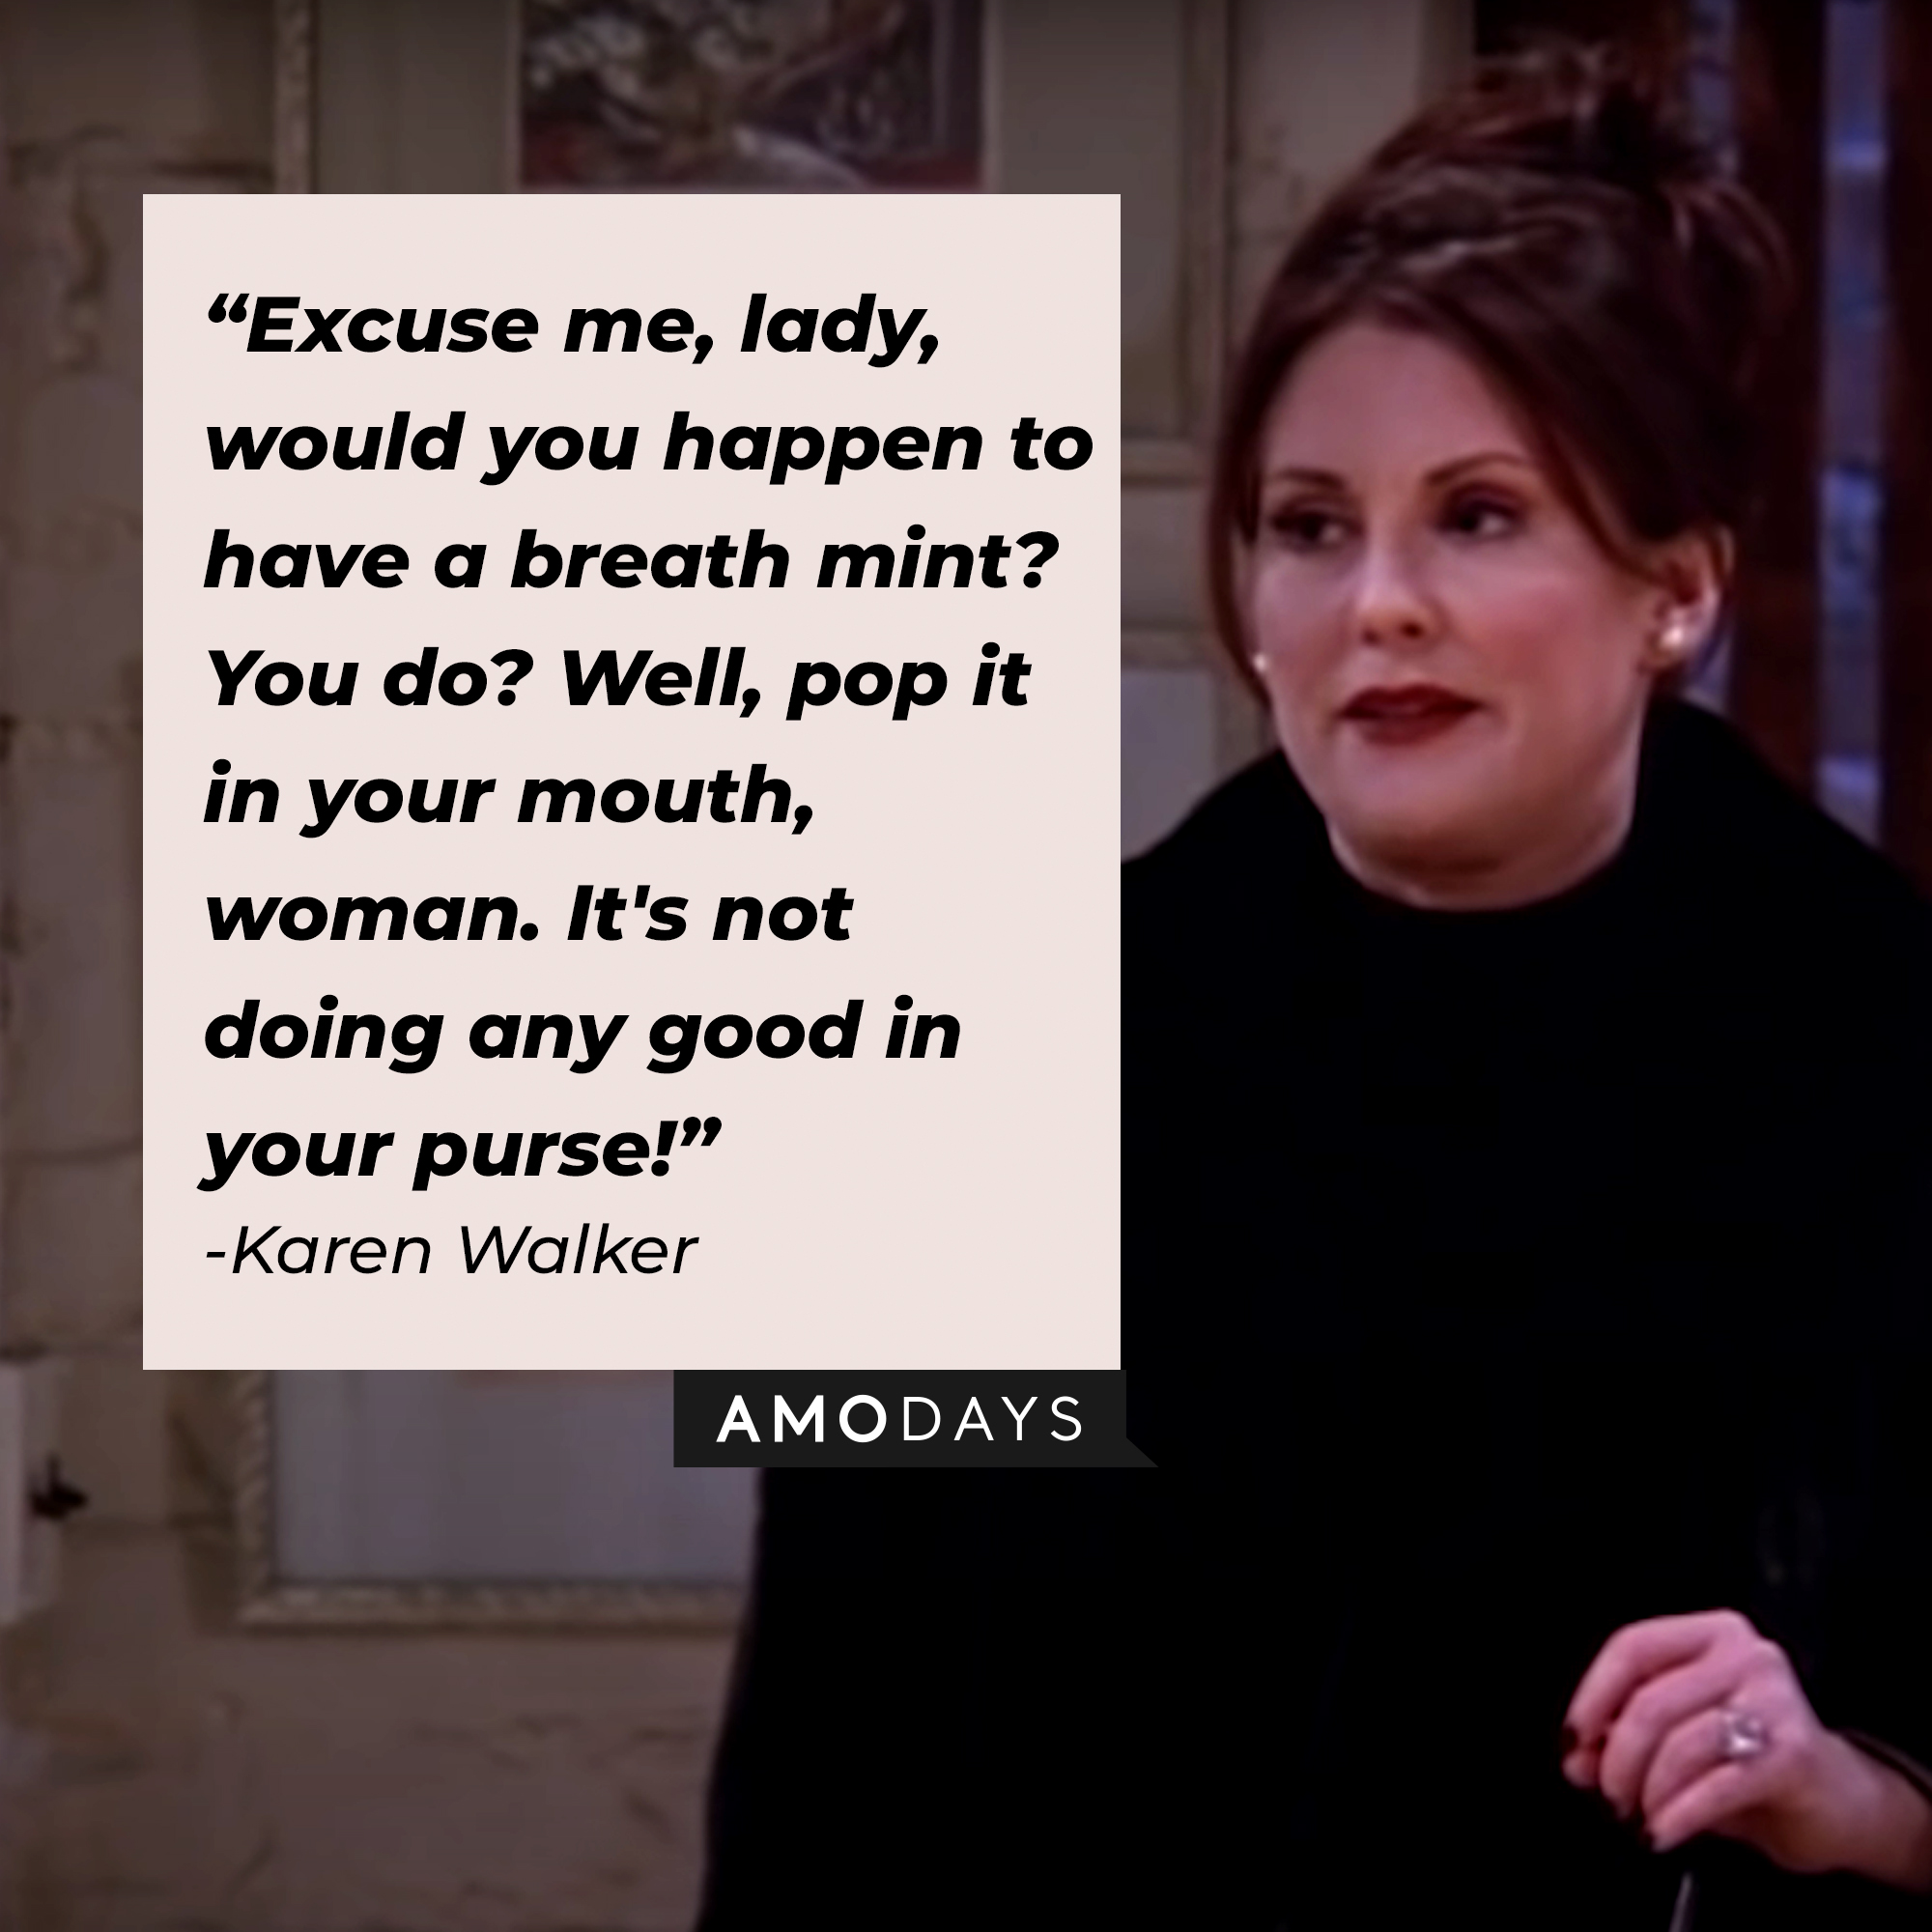 A photo of Karen Walker with the quote, "Excuse me, lady, would you happen to have a breath mint? You do? Well, pop it in your mouth, woman. It's not doing any good in your purse!" | Source: YouTube/ComedyBites